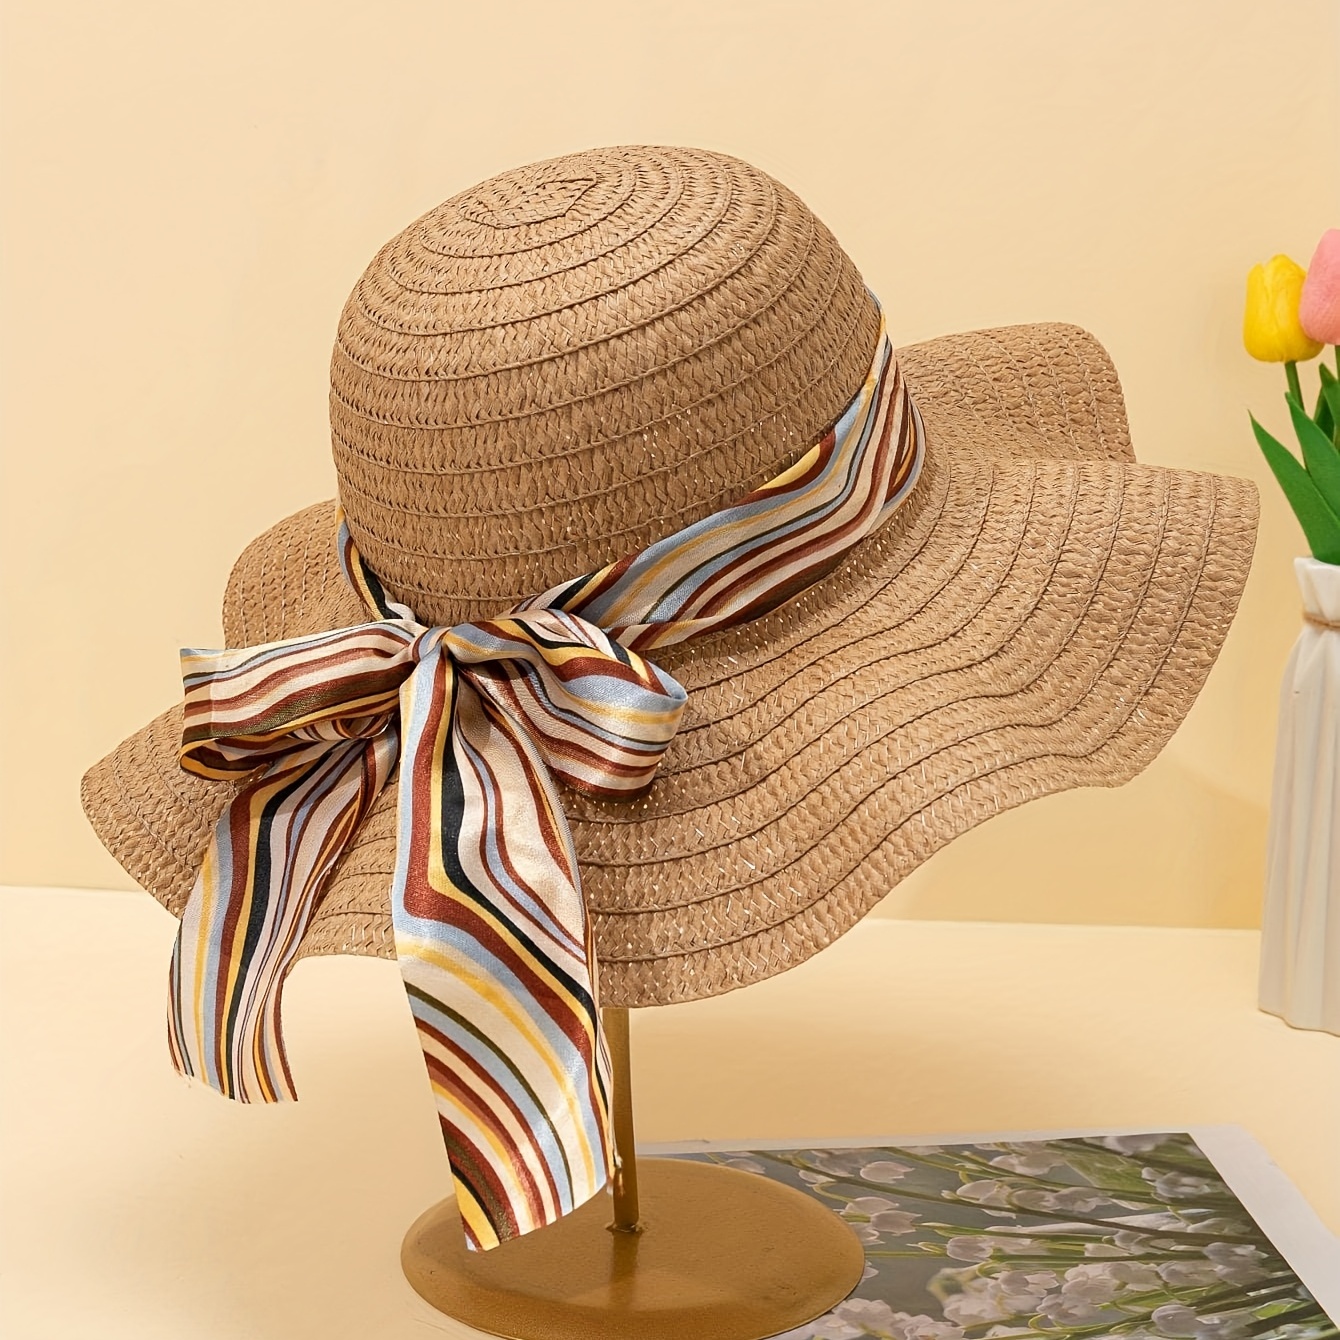 

Women's Stylish Large Brim Straw Hat With Striped Bowknot Ribbon - Sun & Uv Protection For The Beach!